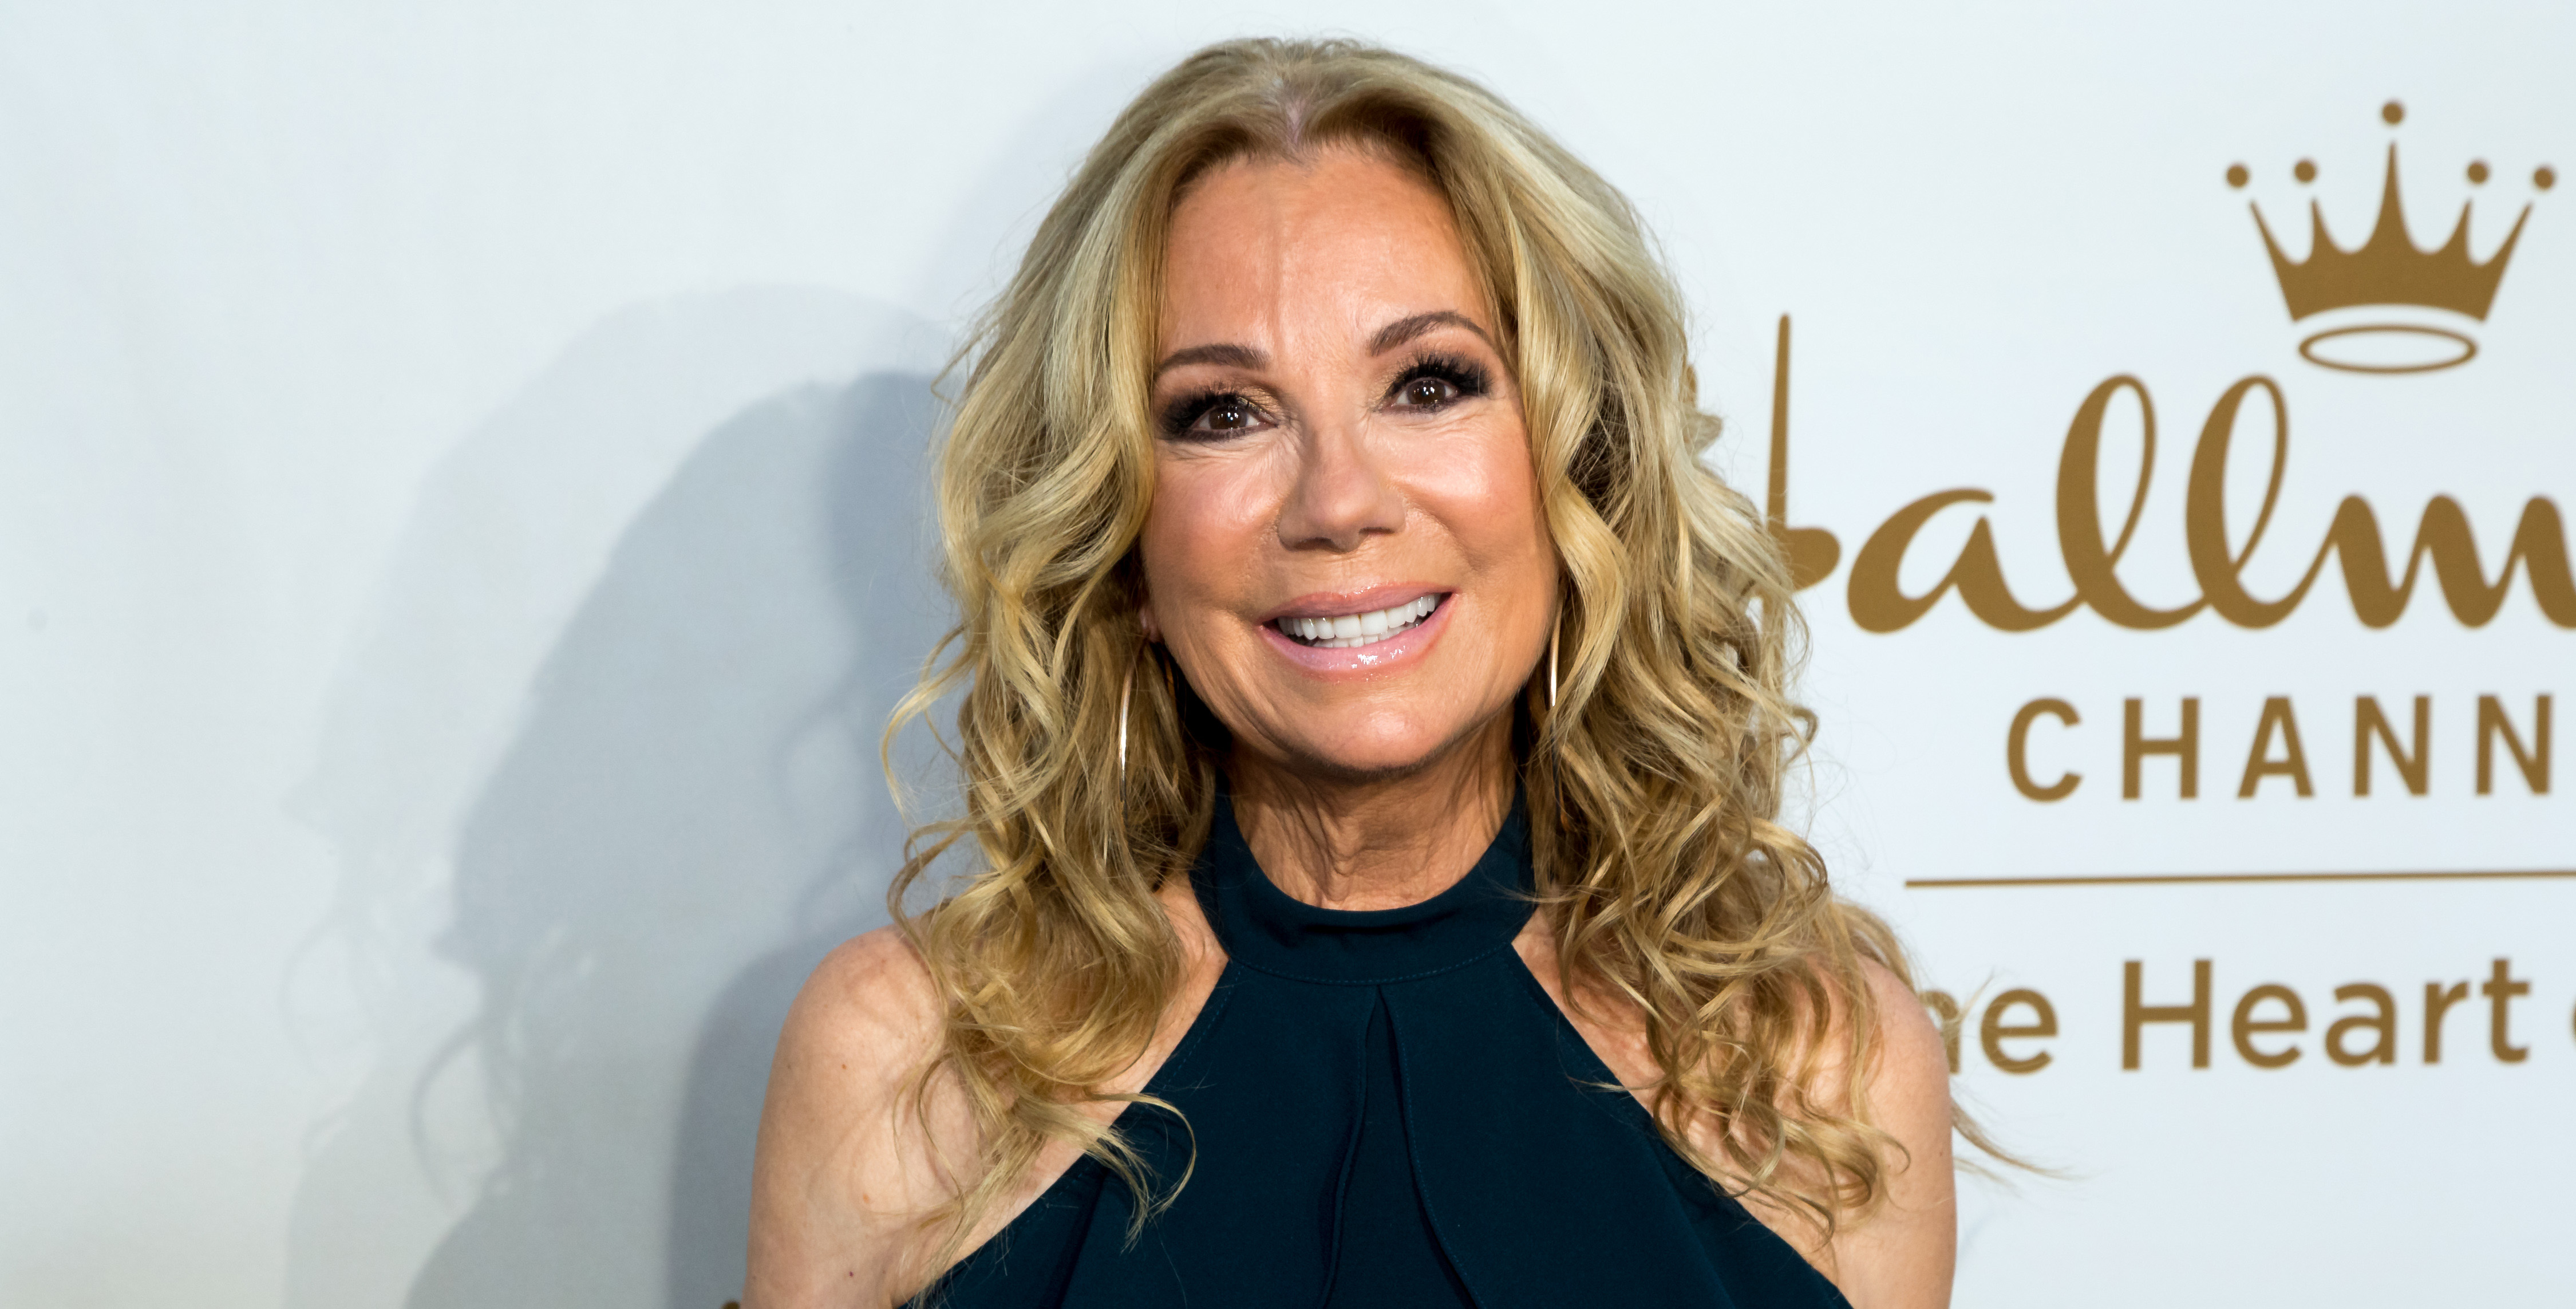 kathie lee gifford says goodbye to 'today' show in emotional